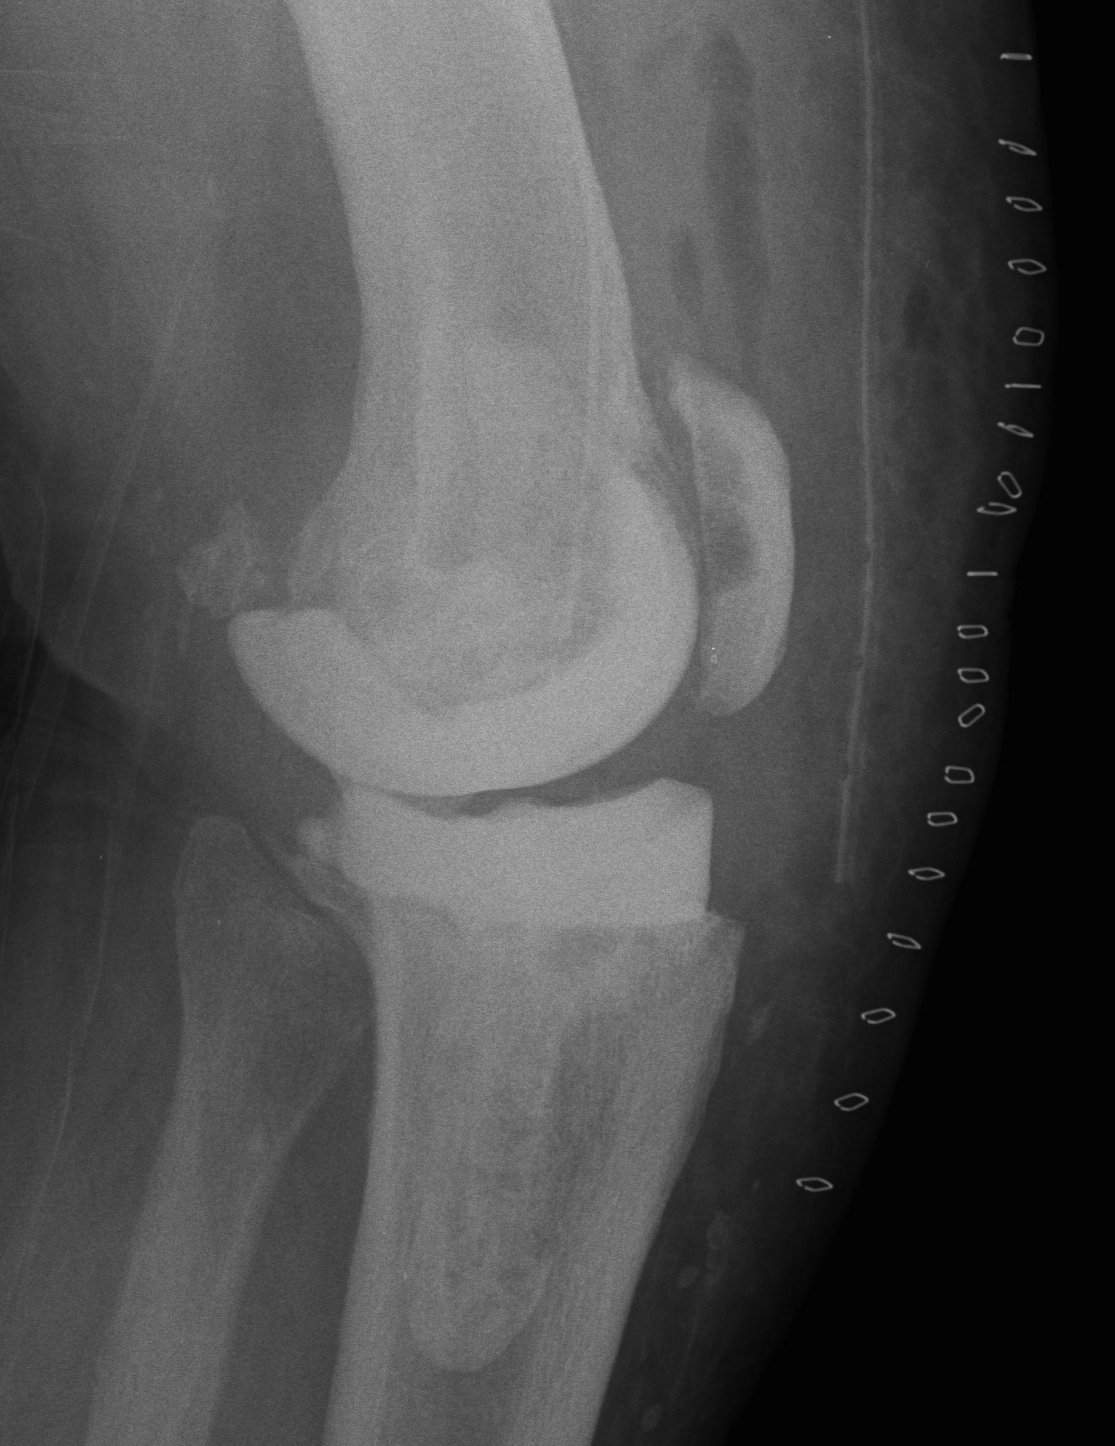 Infected TKR Cement Femur and Tibia